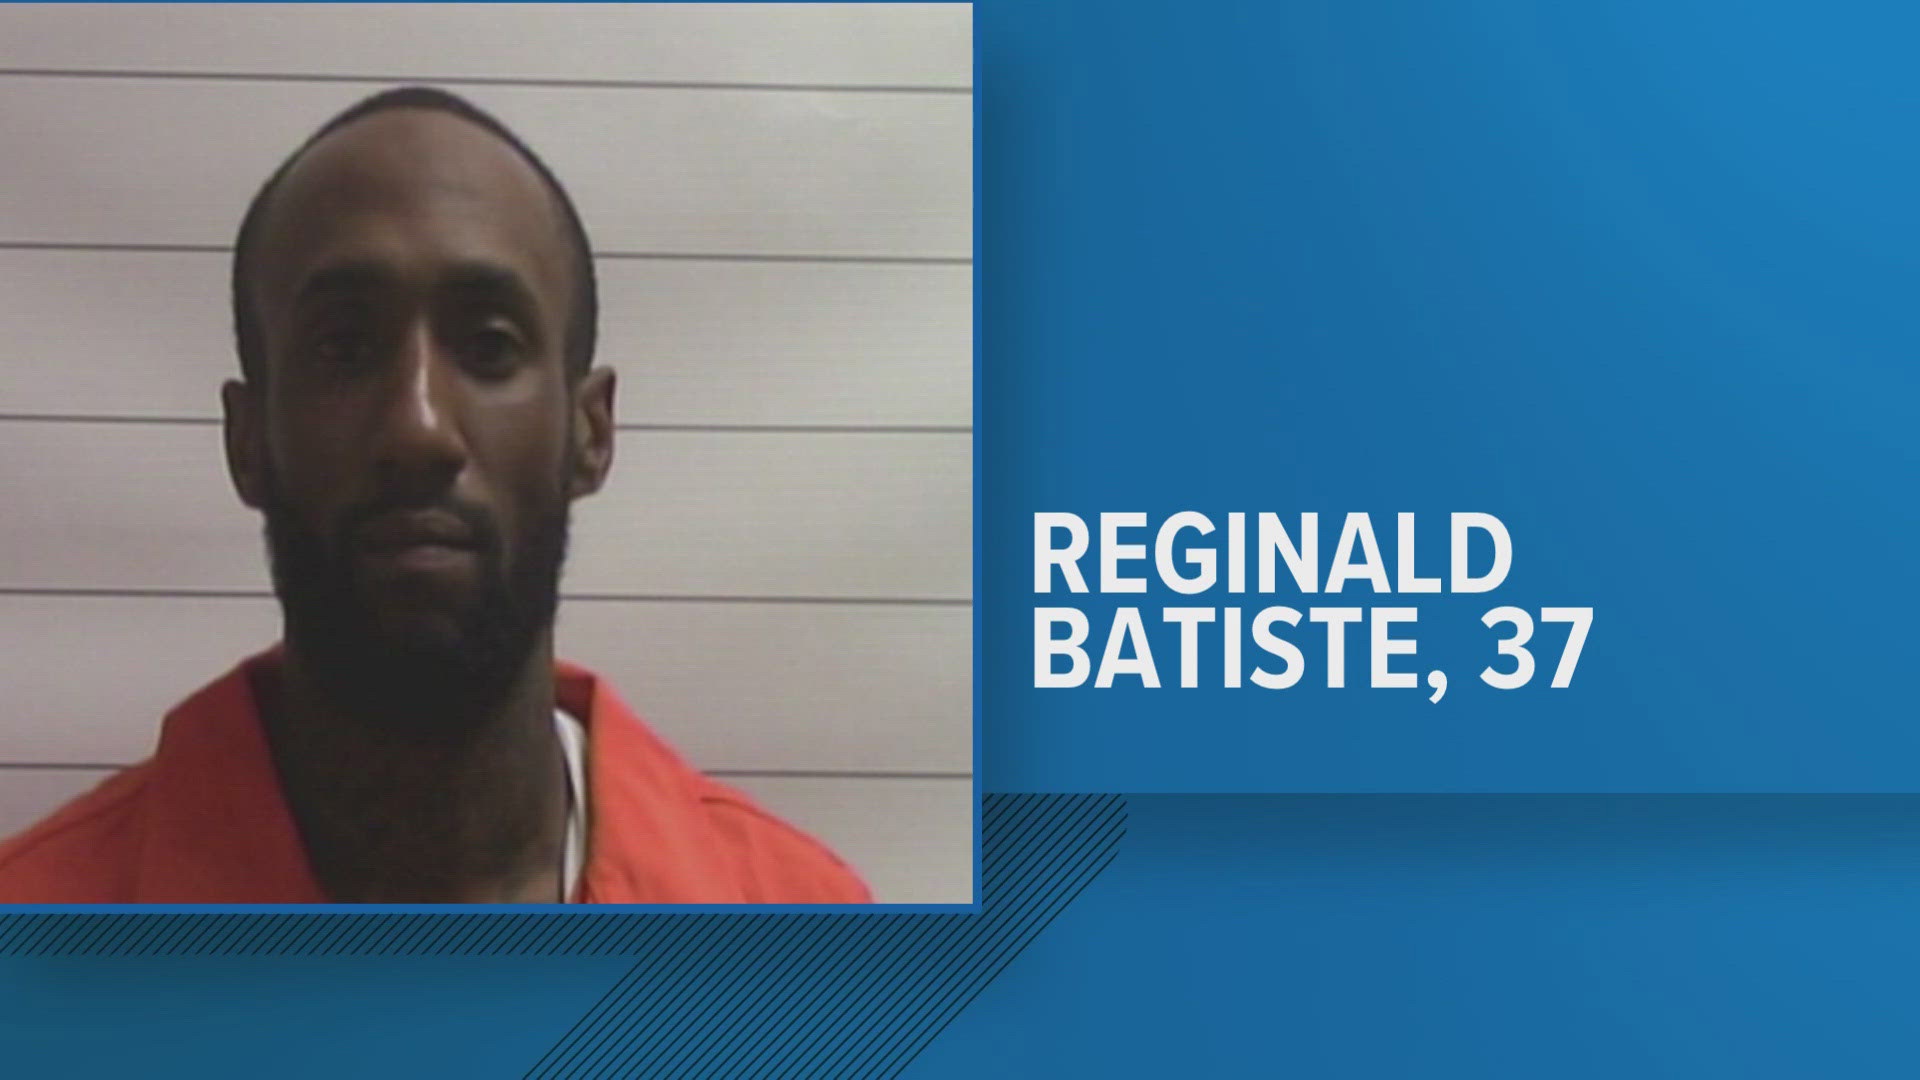 A suspect has been arrested for that deadly shooting. It happened on Bienville street near Decatur at around 9:00 last Sunday while people crowded the streets.